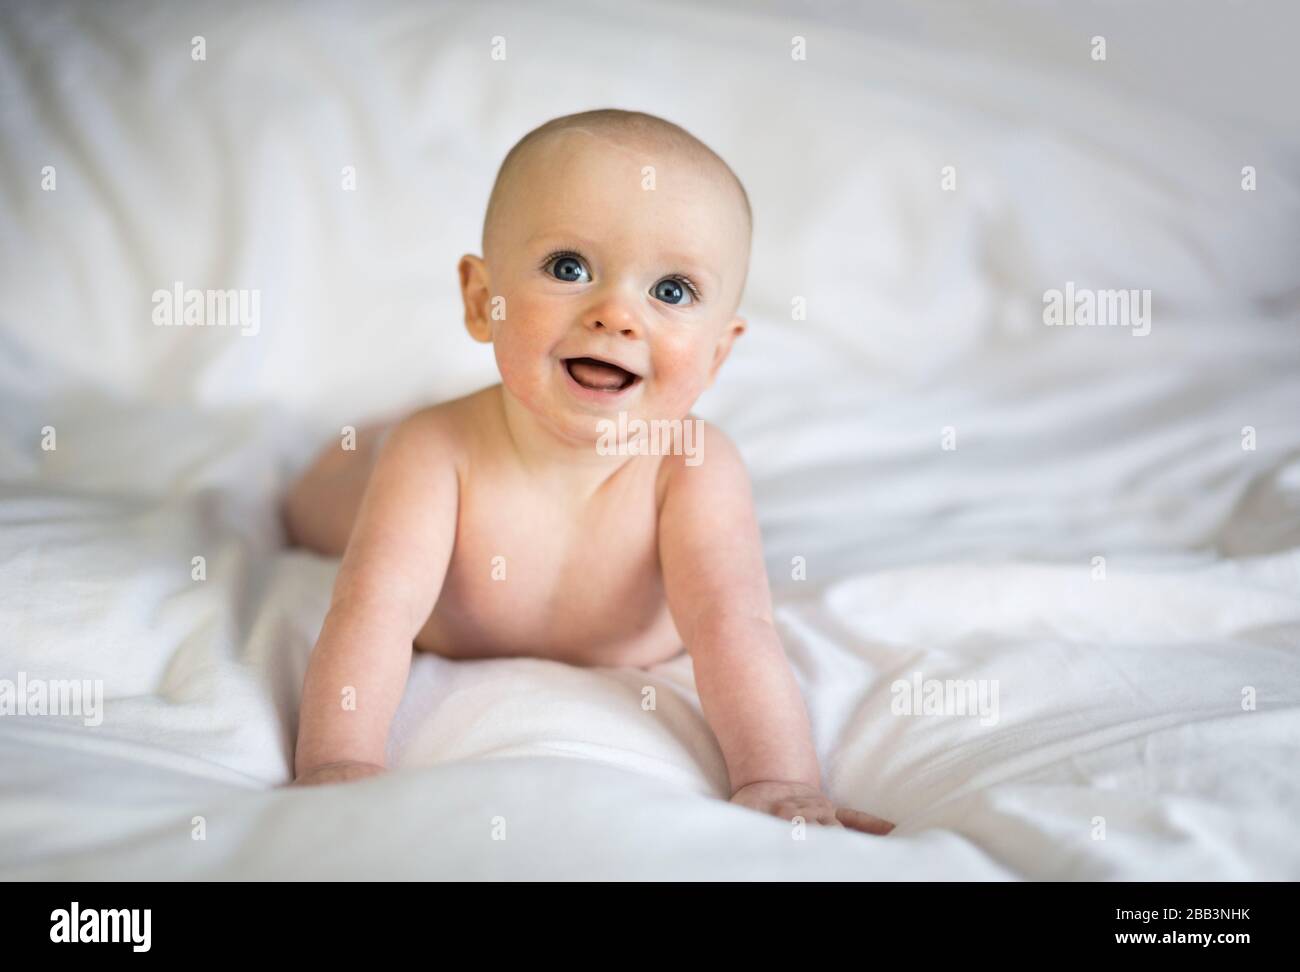 Baby boy, 5 months old, lying on a bed, UK Stock Photo